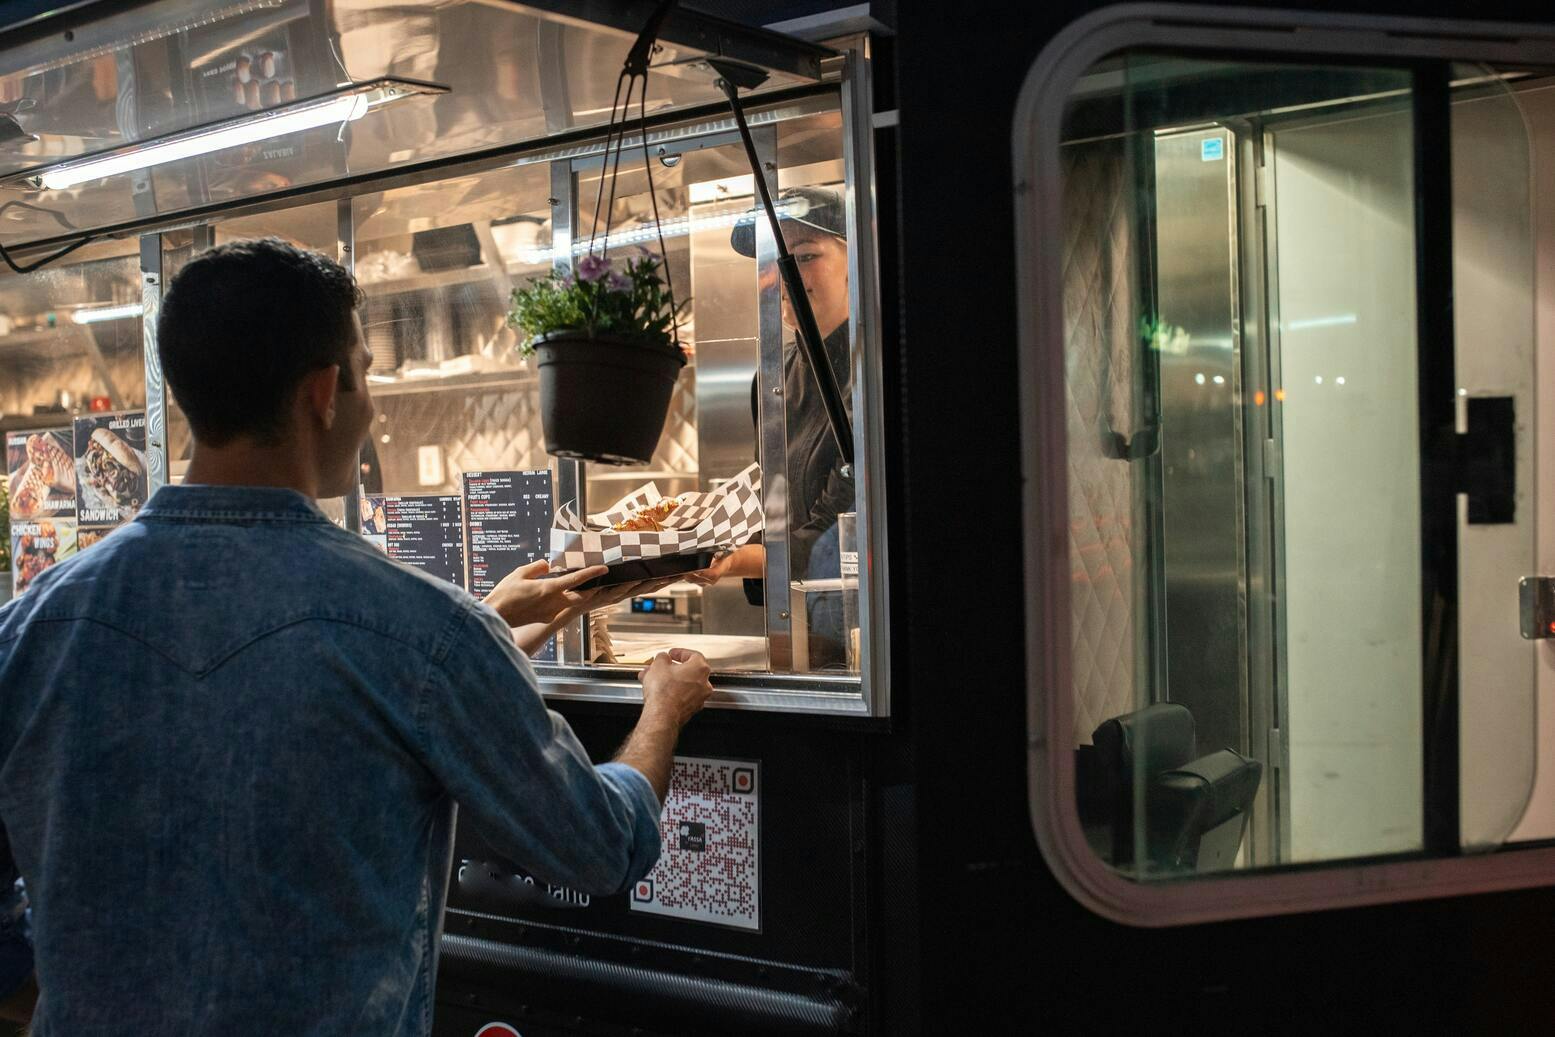 Image of a customer collecting food from a food truck